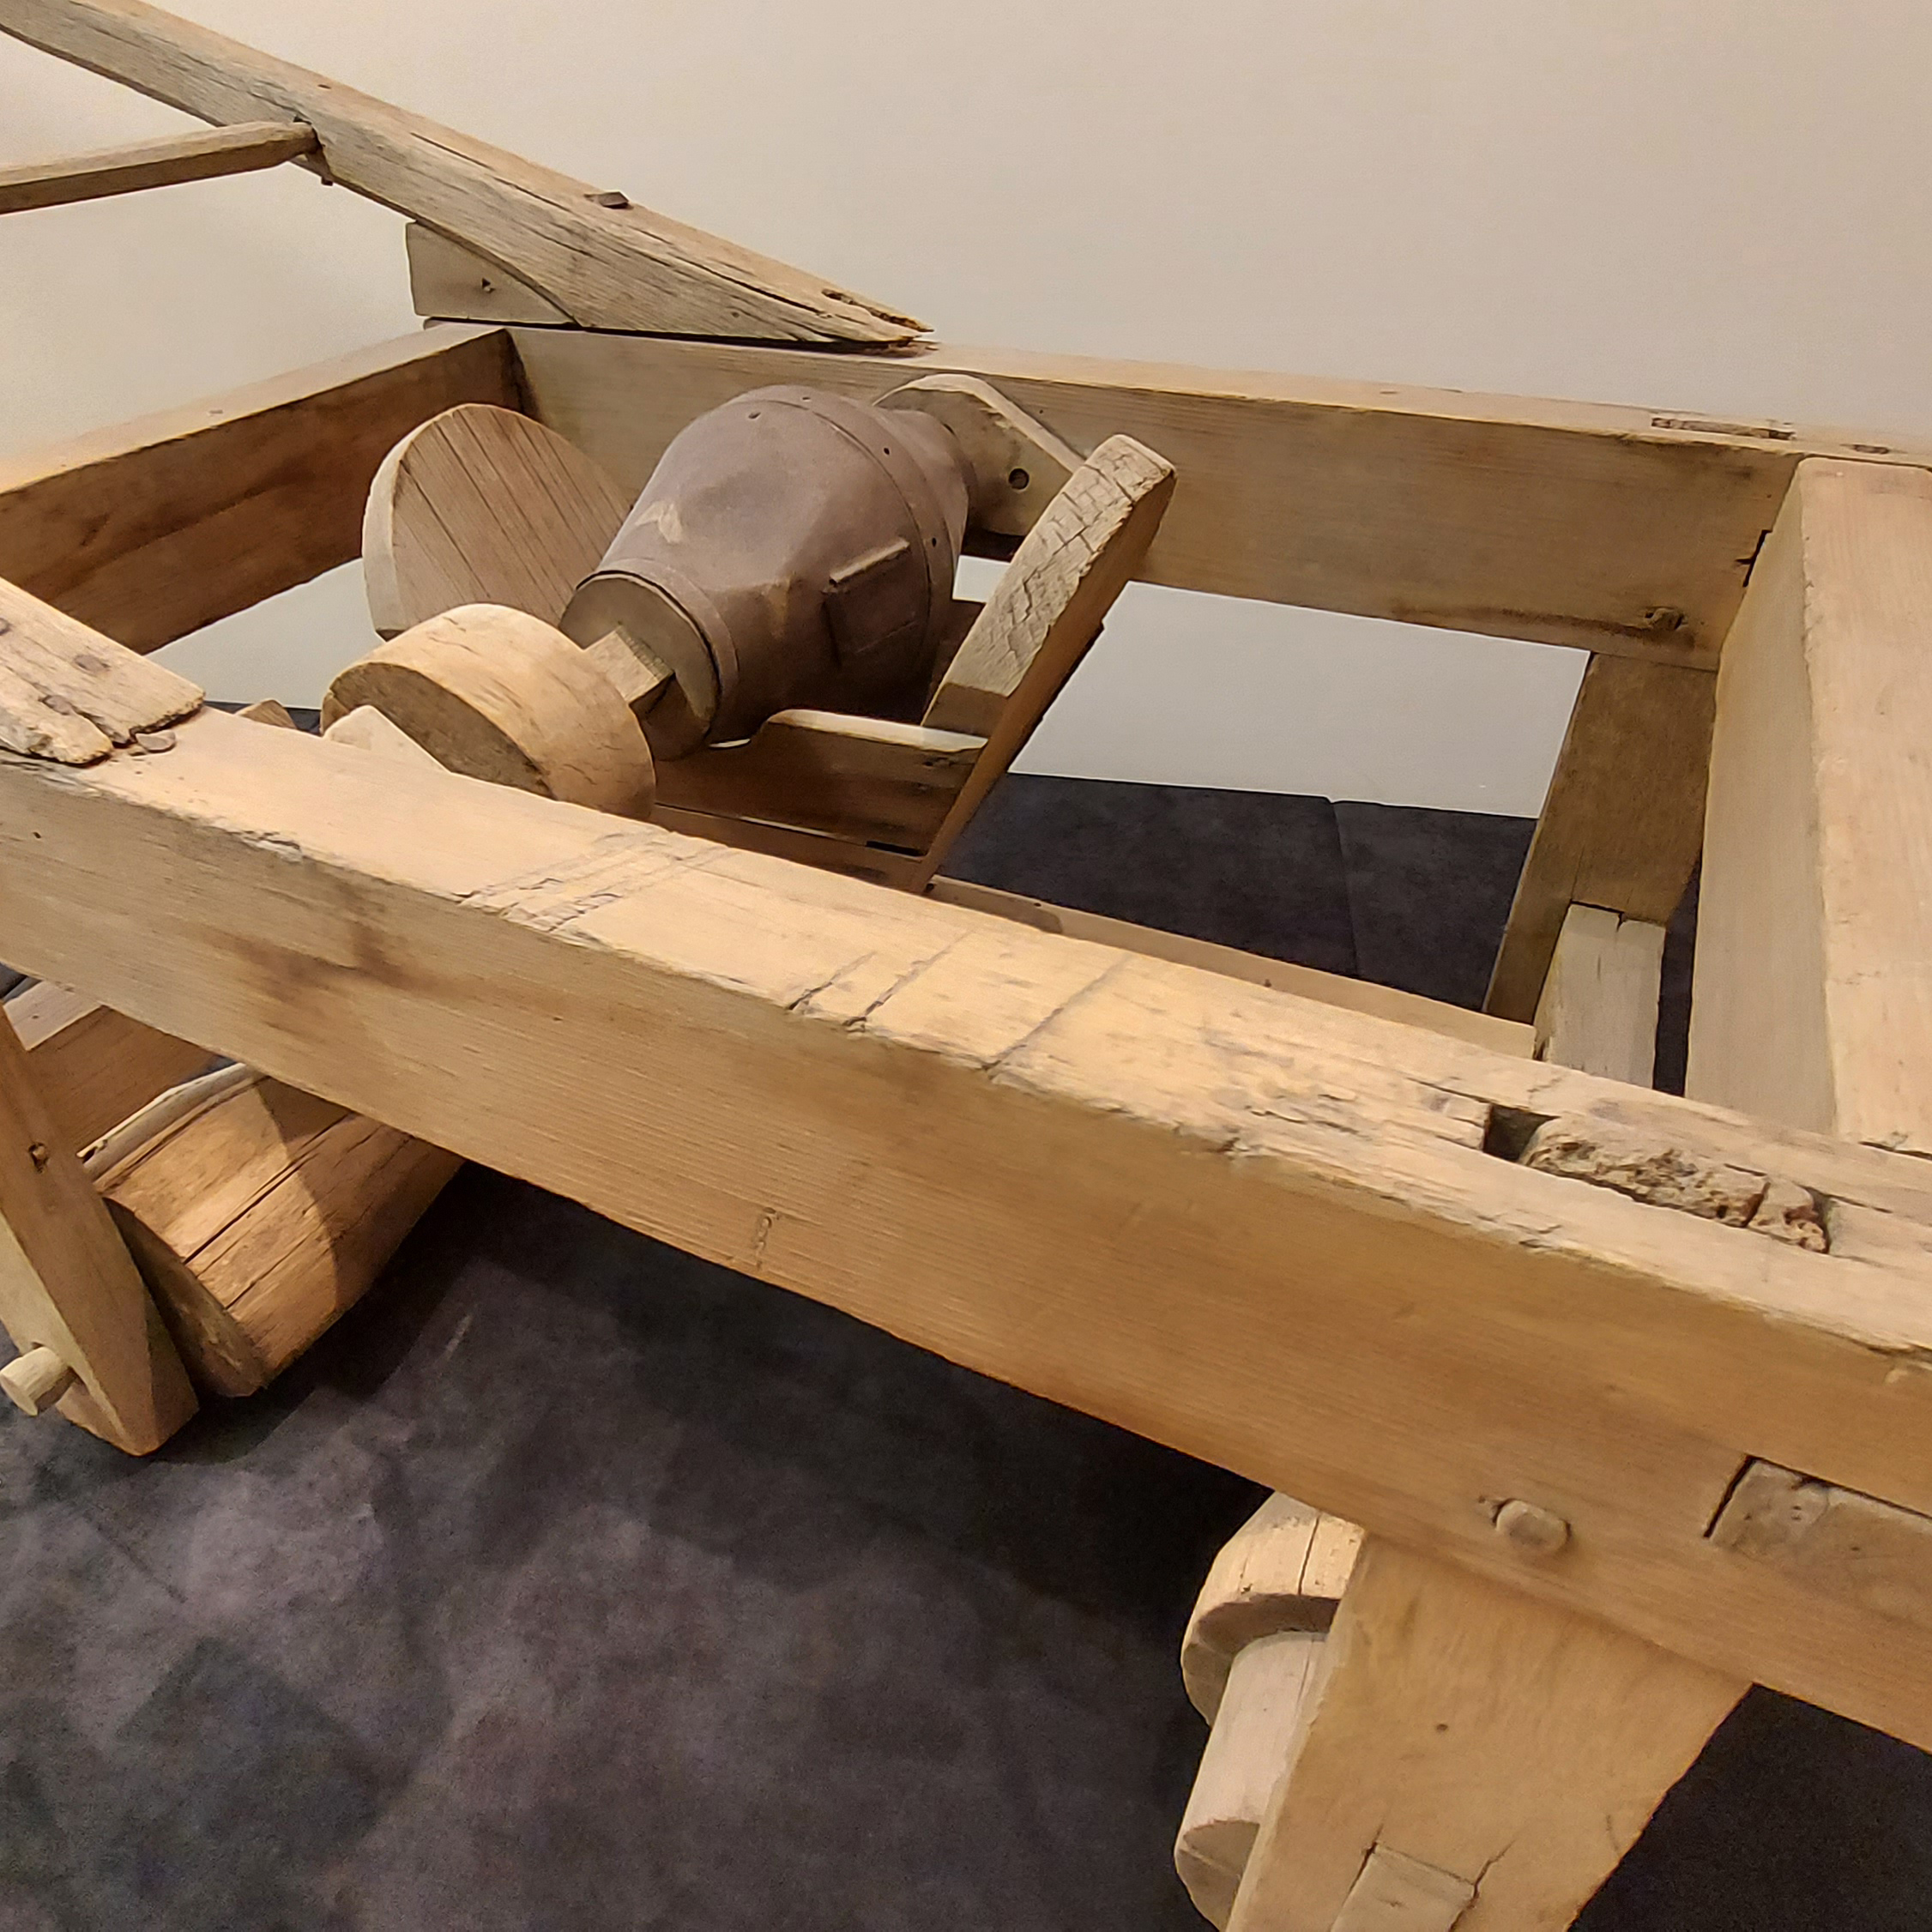 wooden turnip seeder tool, with wheels.